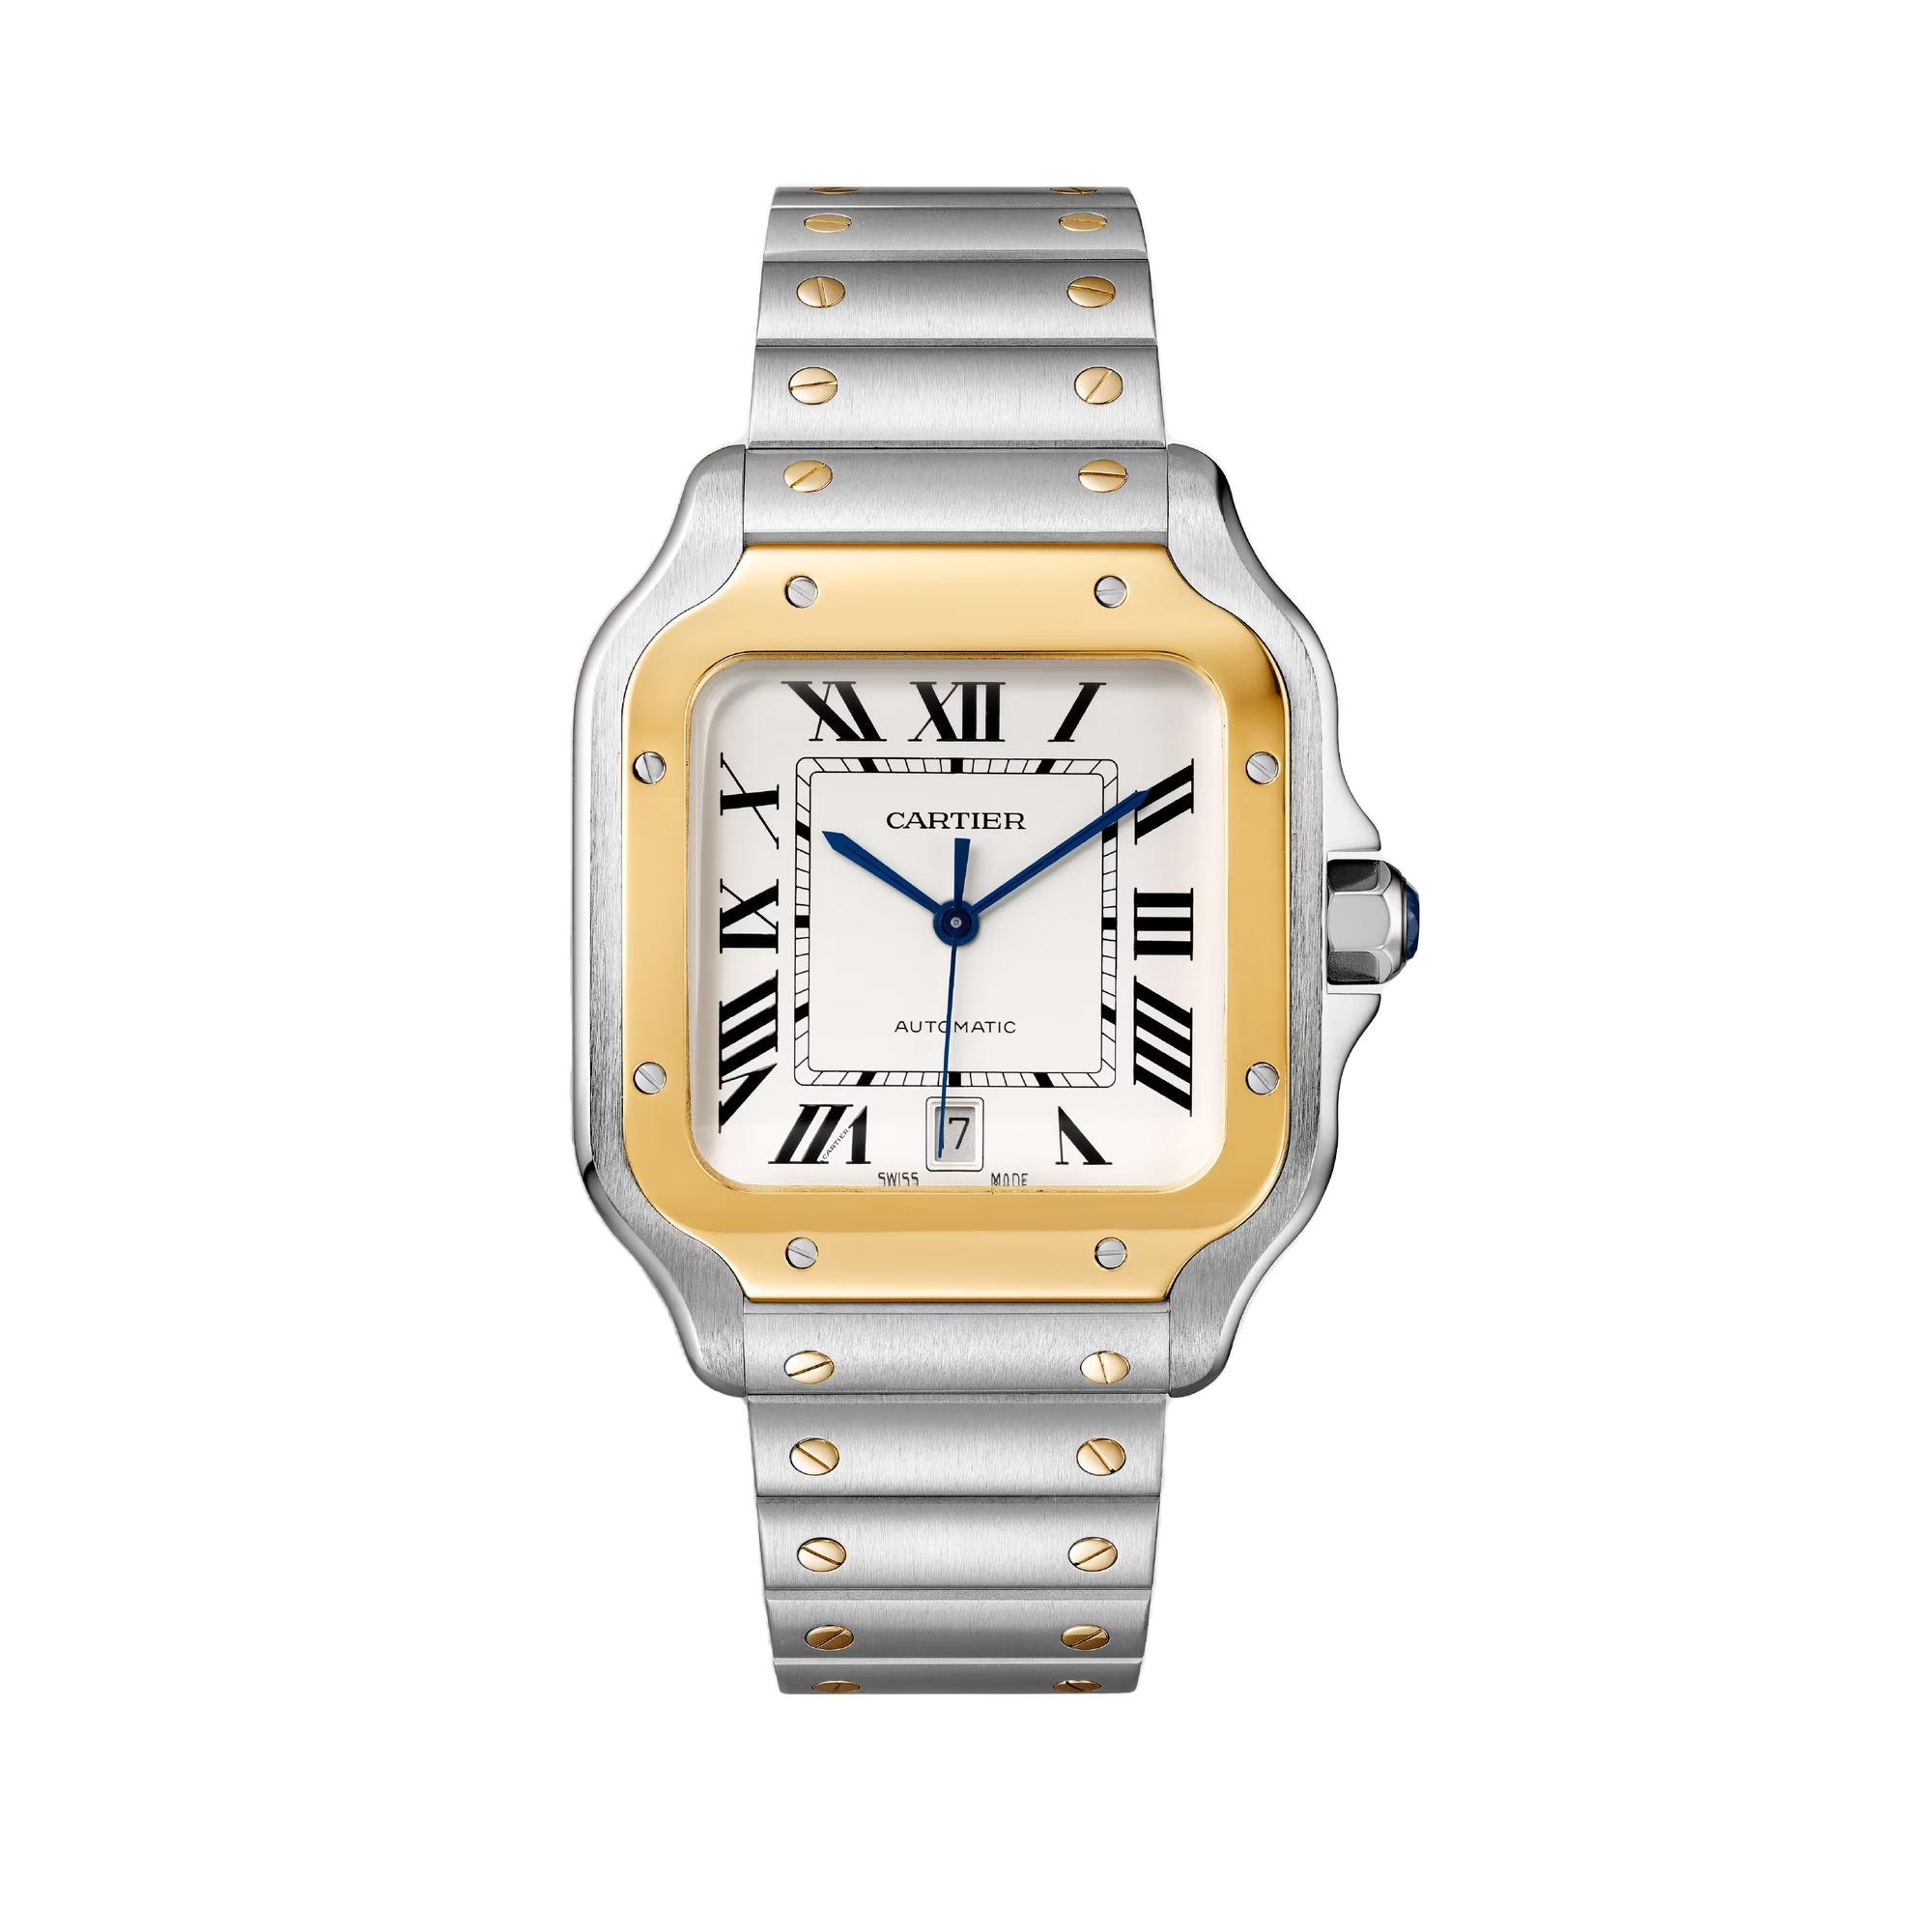 Santos de Cartier Watch with Yellow Gold, size large